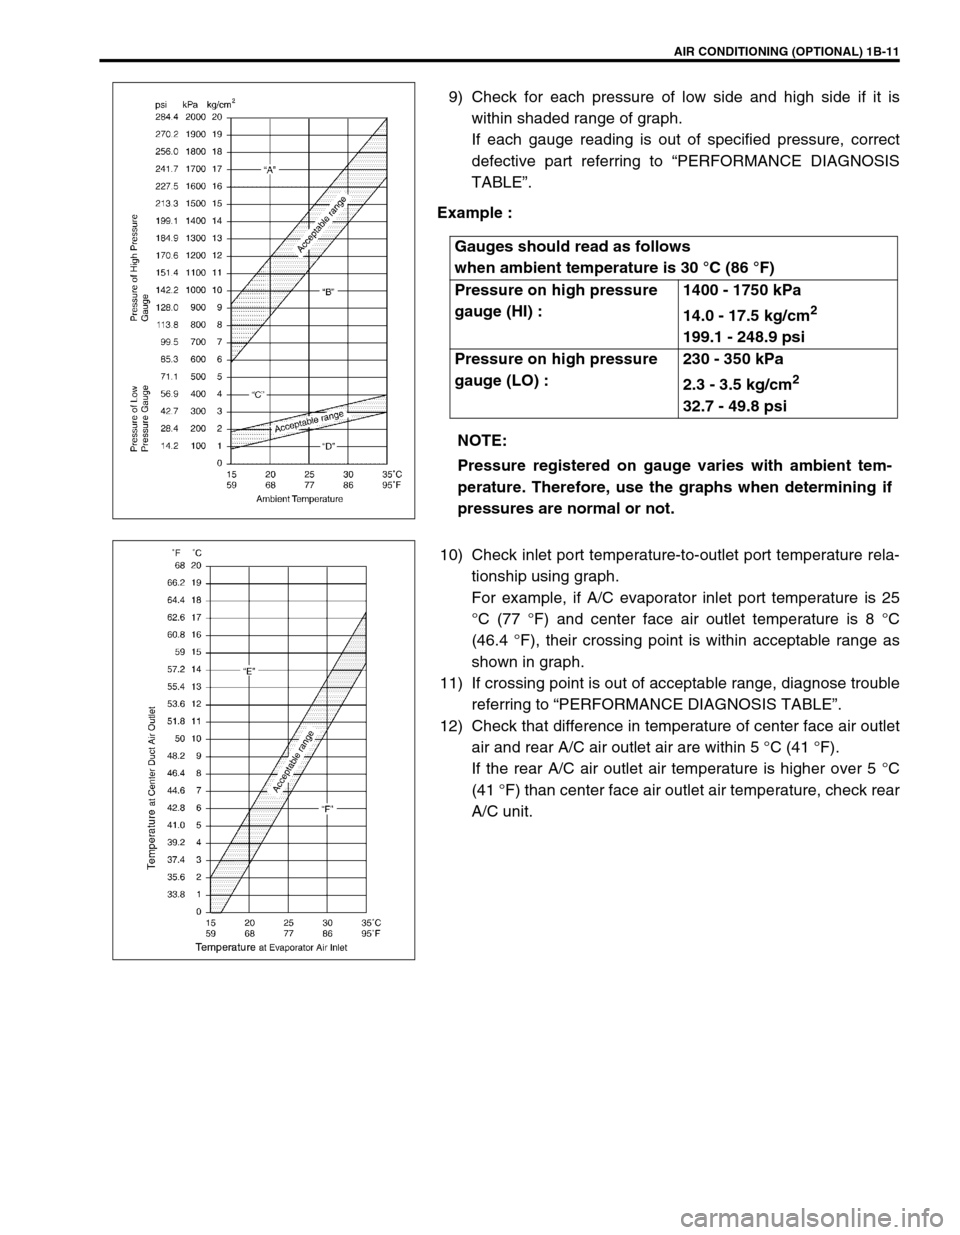 SUZUKI GRAND VITARA 2001 2.G Owners Manual AIR CONDITIONING (OPTIONAL) 1B-11
9) Check for each pressure of low side and high side if it is
within shaded range of graph. 
If each gauge reading is out of specified pressure, correct
defective par